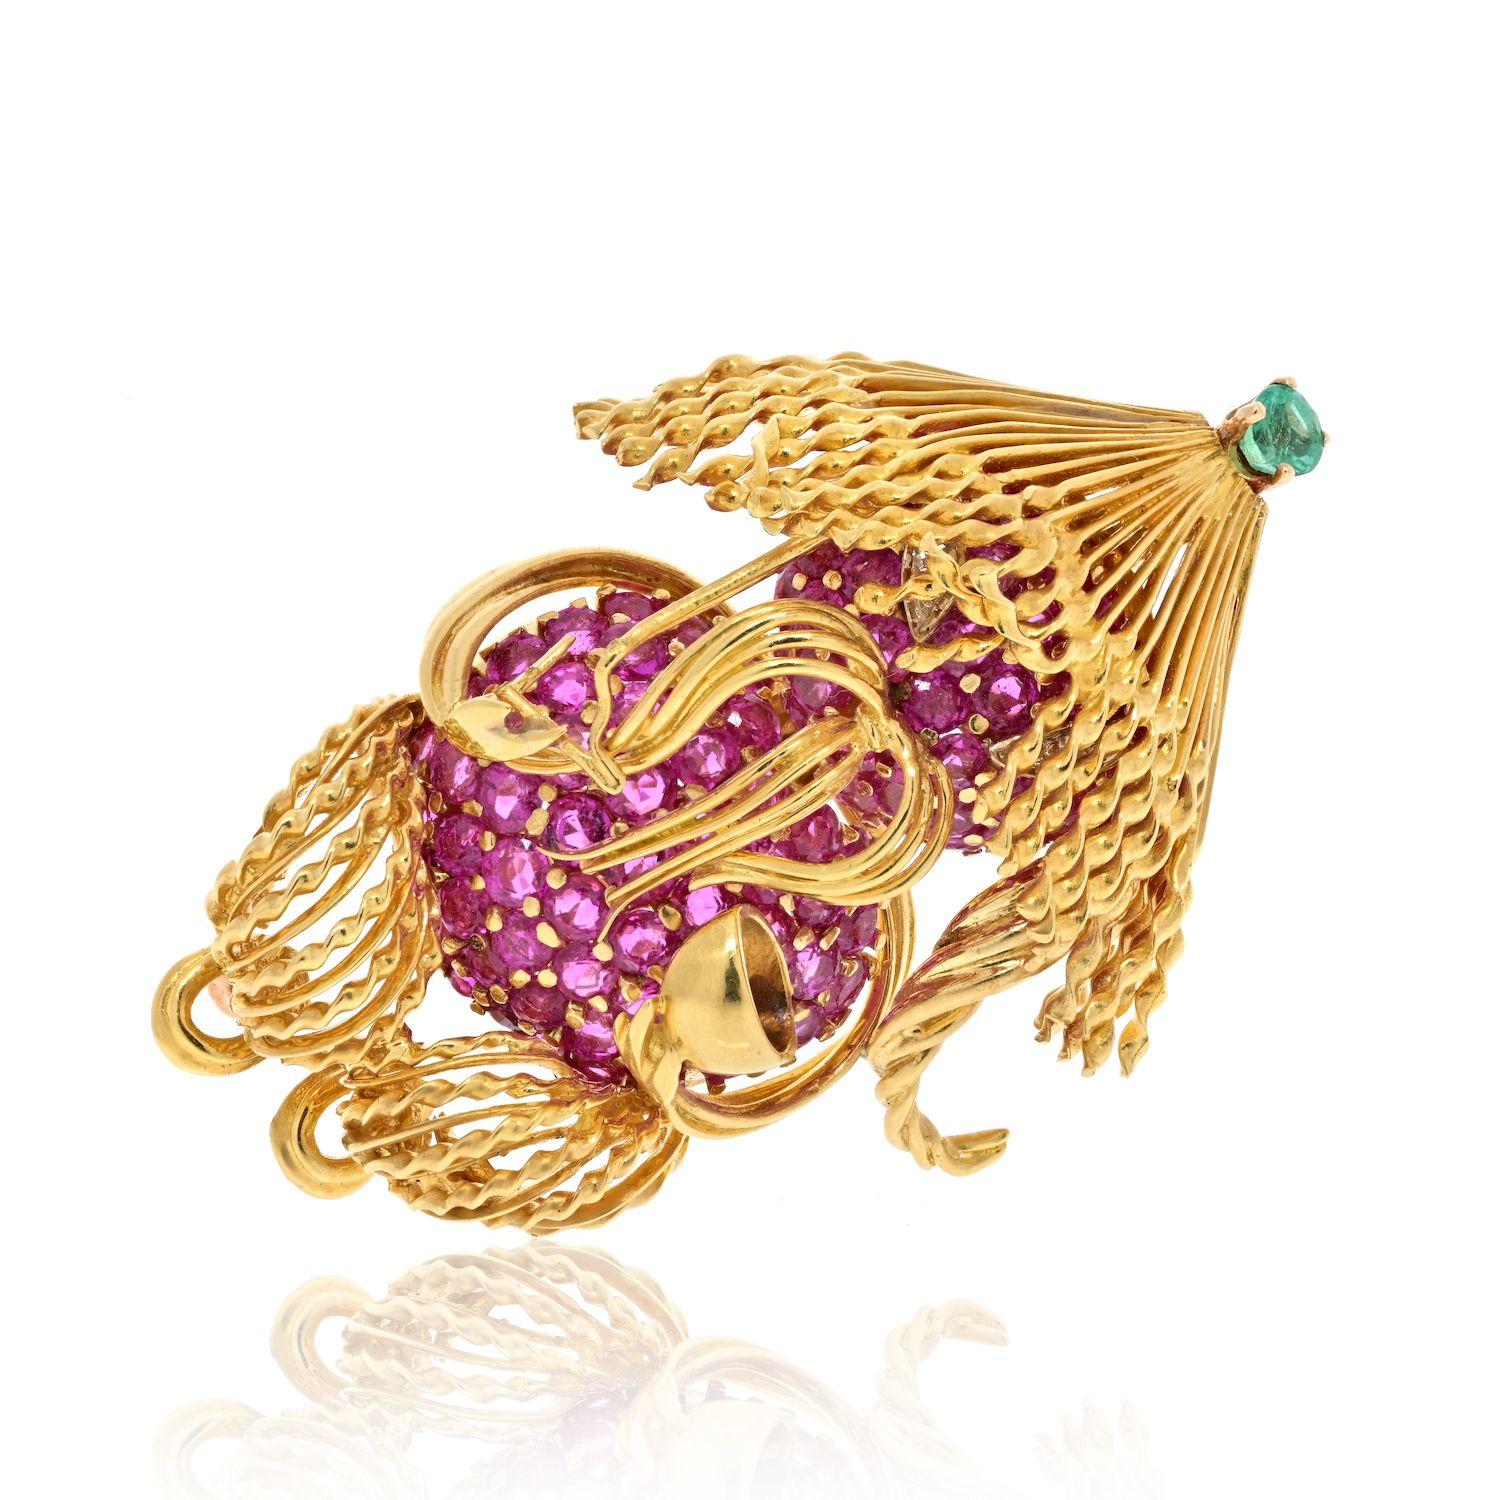 Presenting an extraordinary creation from the renowned jewelry house Tiffany & Co., designed by the visionary Jean Schlumberger, comes a Yellow Gold Brooch that exemplifies artistry and whimsy. This captivating brooch showcases a unique design,